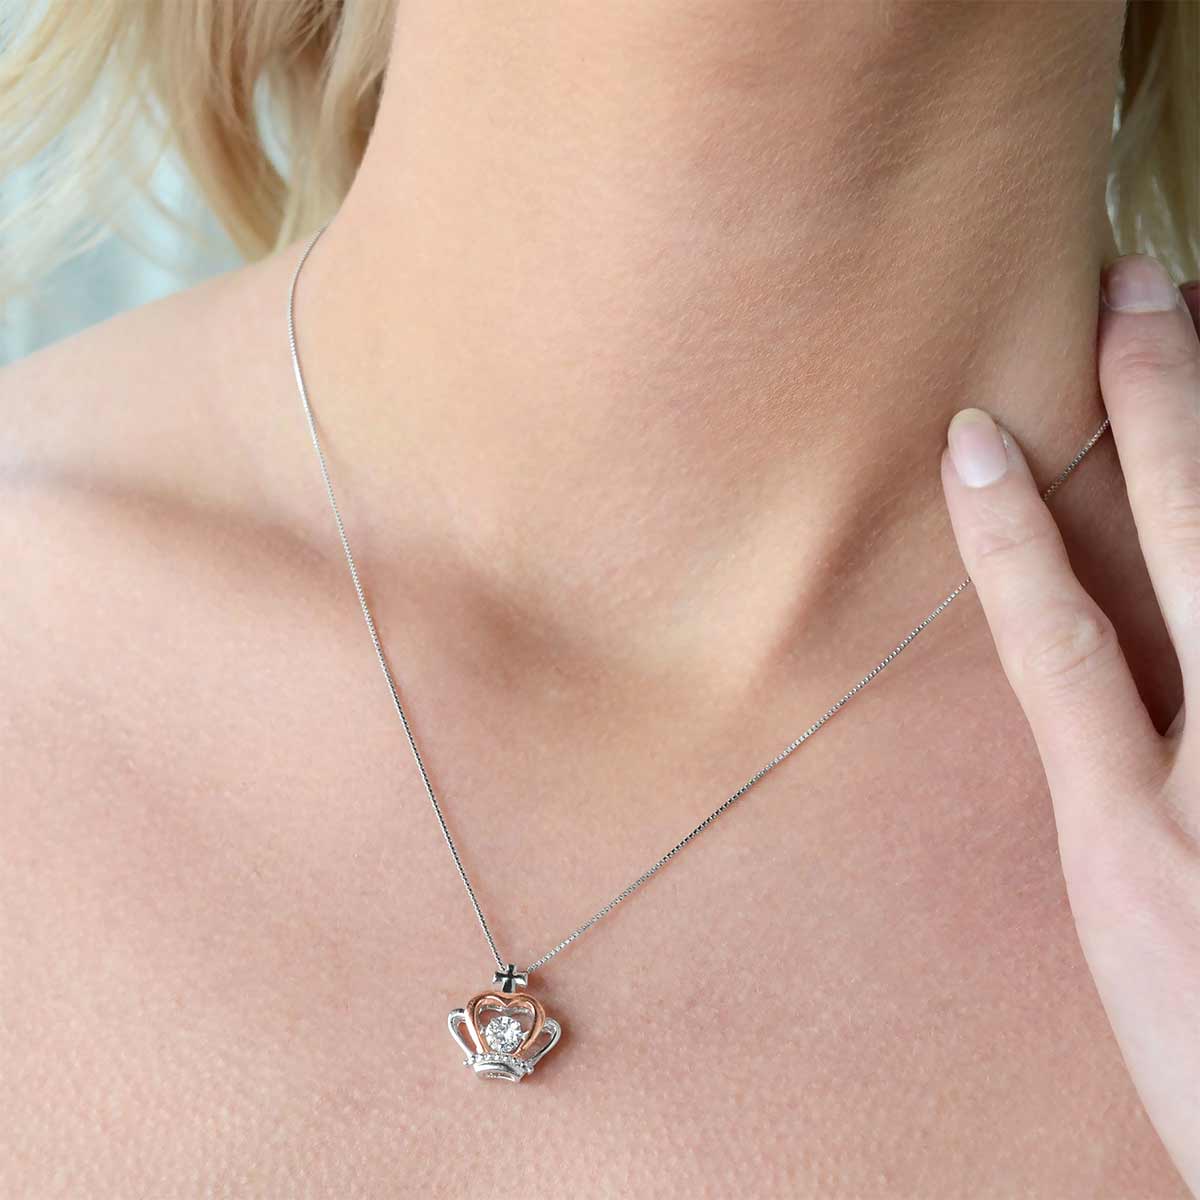 To My Badass Mom - Luxe Crown Necklace Set With Mystery Box